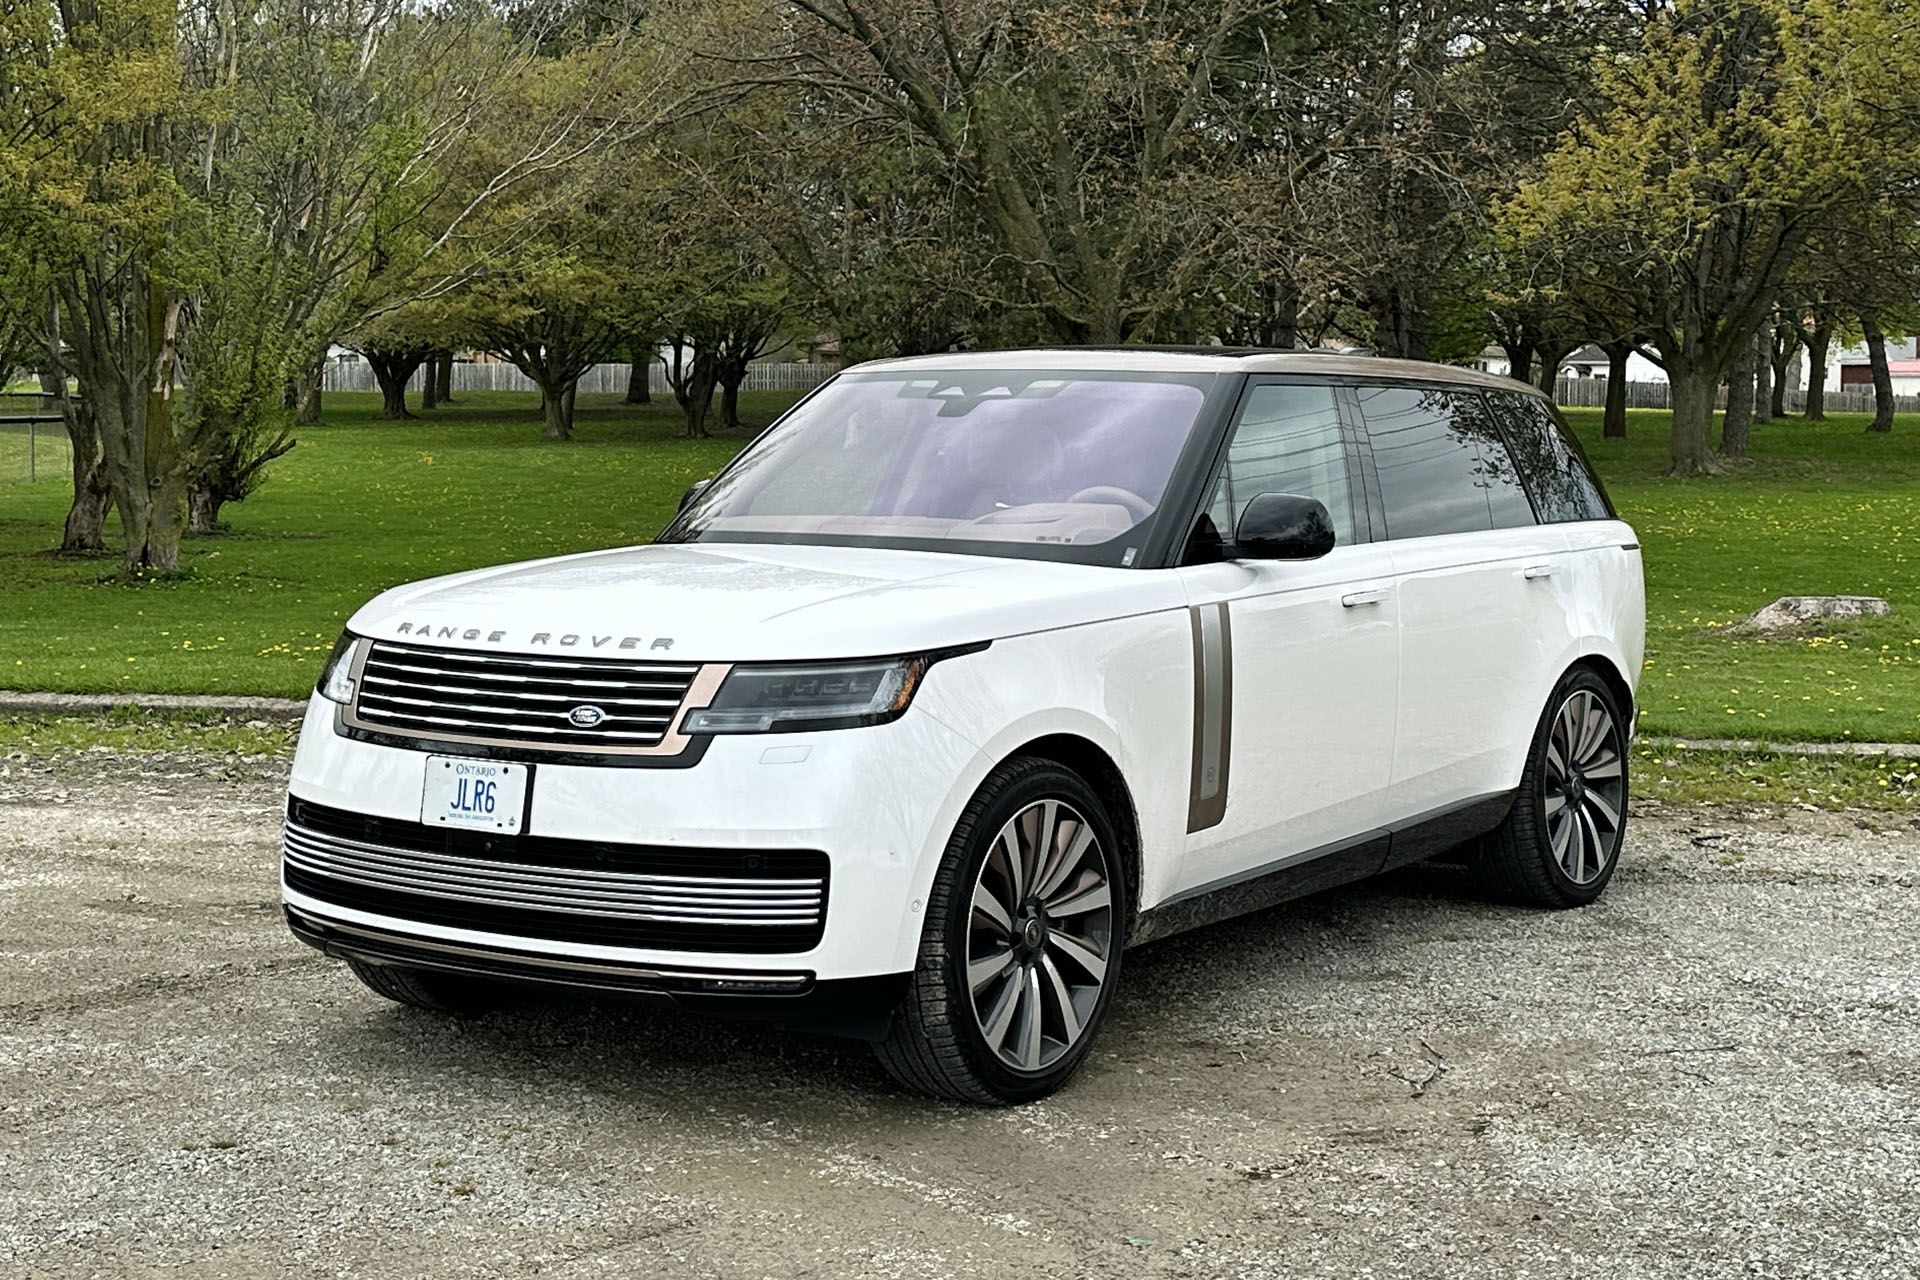 2023 Land Rover Range Rover SV, Luxury SUV Review